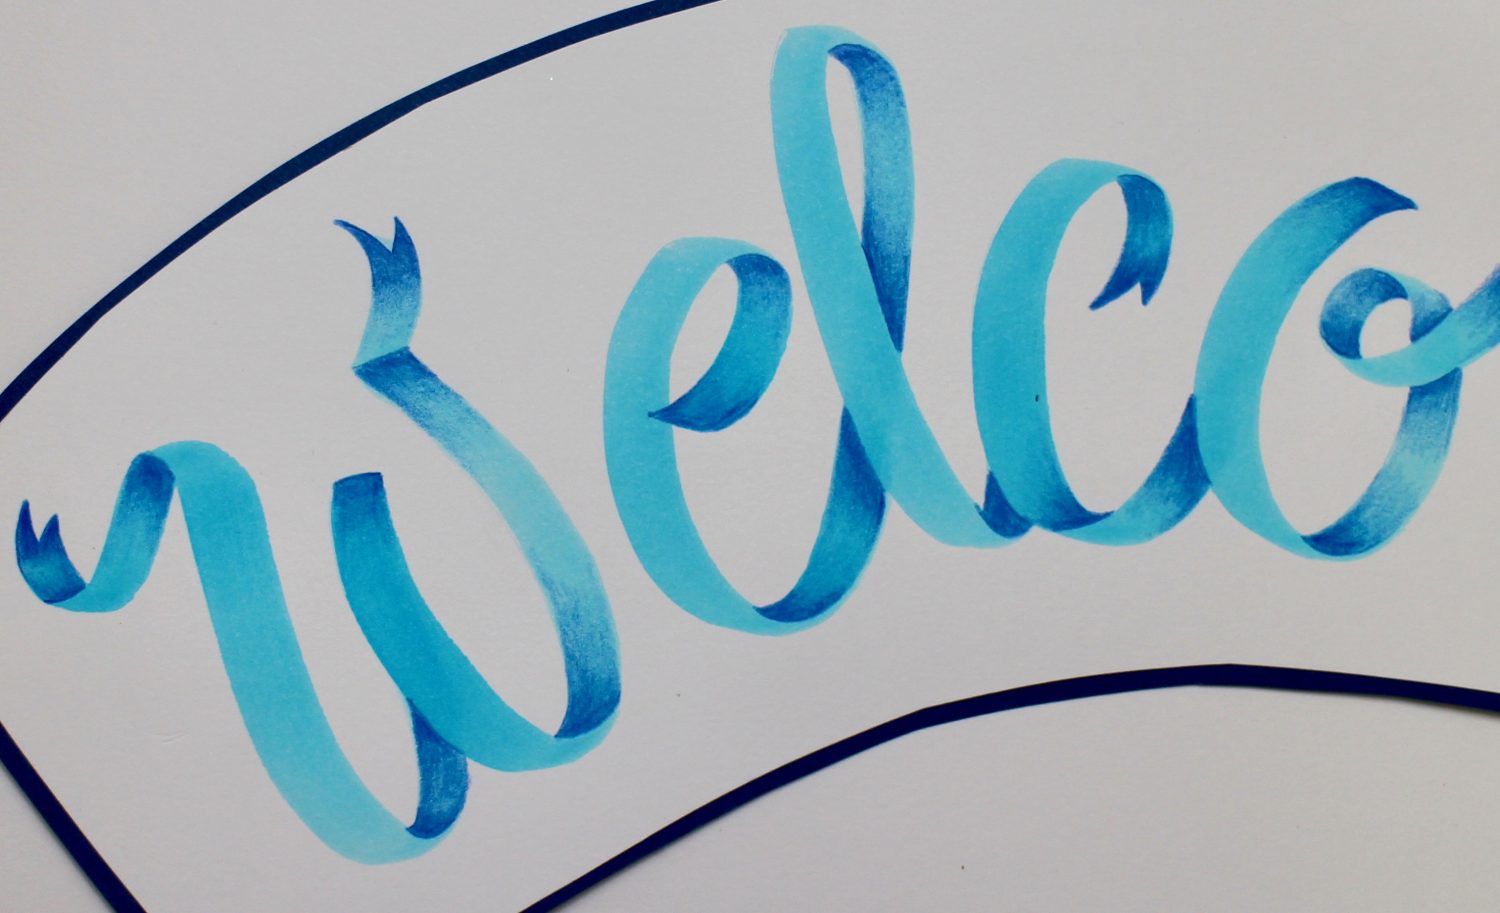 @mariebcreates #tombow #tombow2017dt Cut out the welcome sign